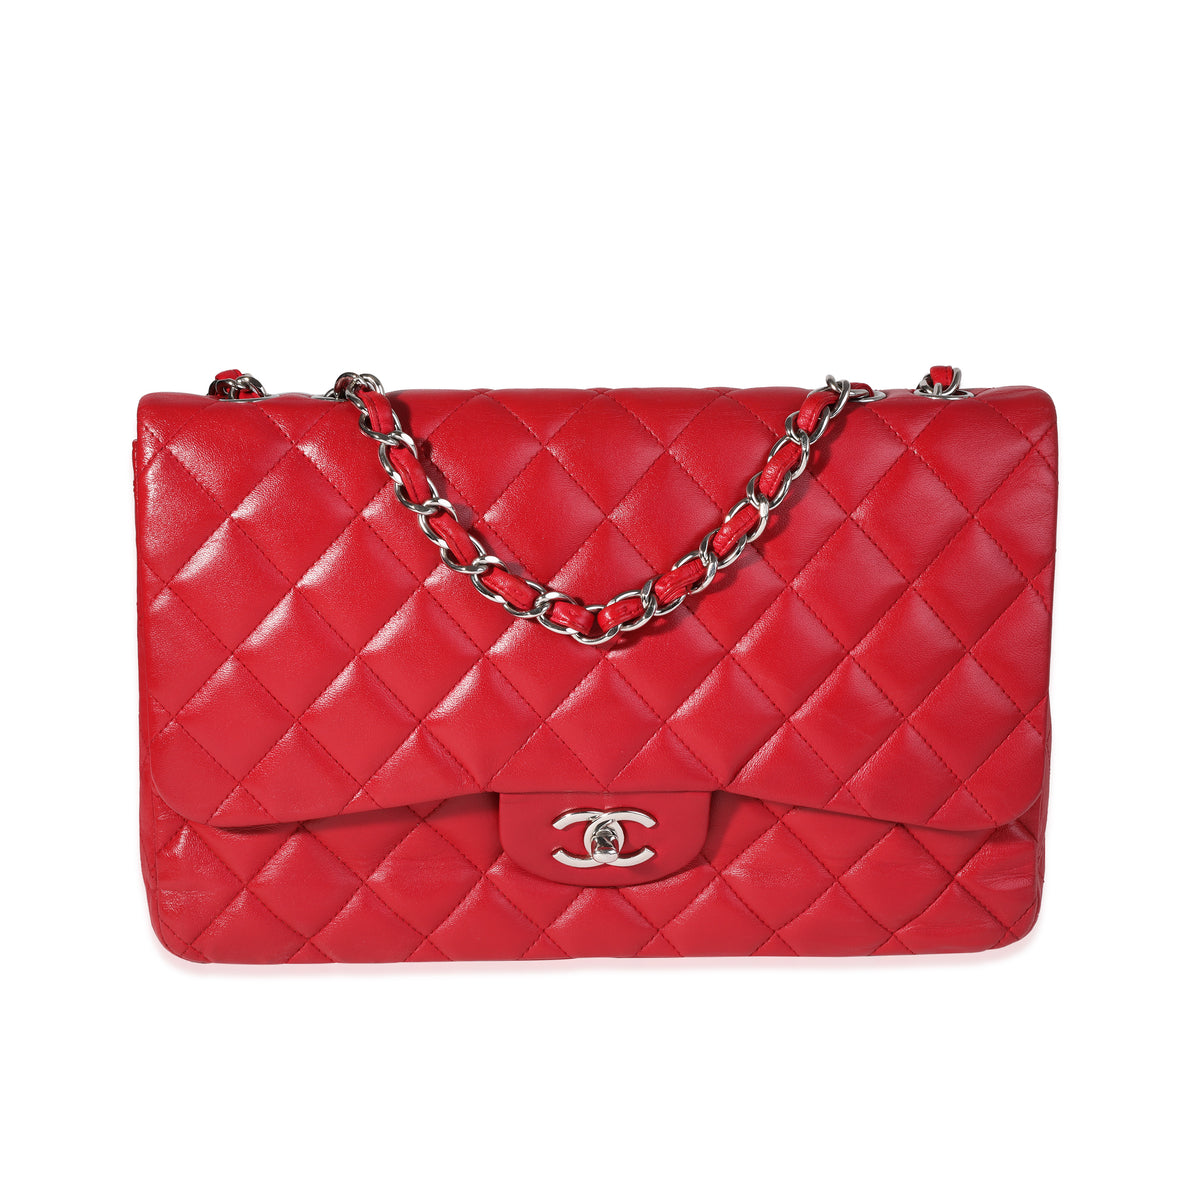 Chanel Red Quilted Lambskin Jumbo Classic Single Flap Bag, myGemma